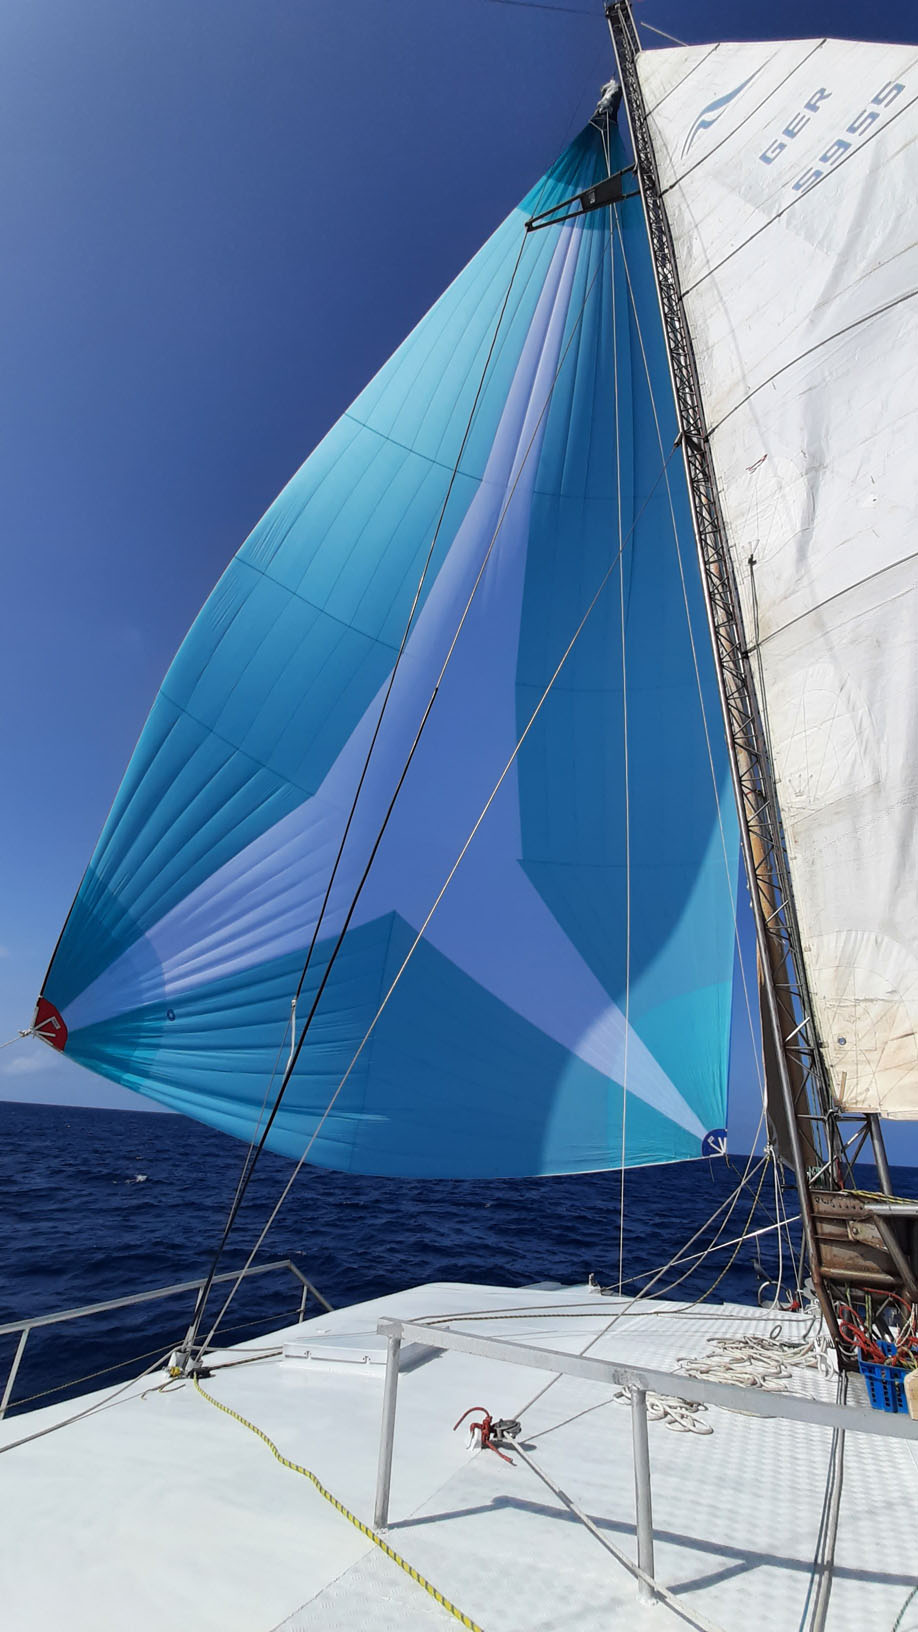 2012 Other WaveScalpel 57' Sailboat for sale in Portugal - image 13 